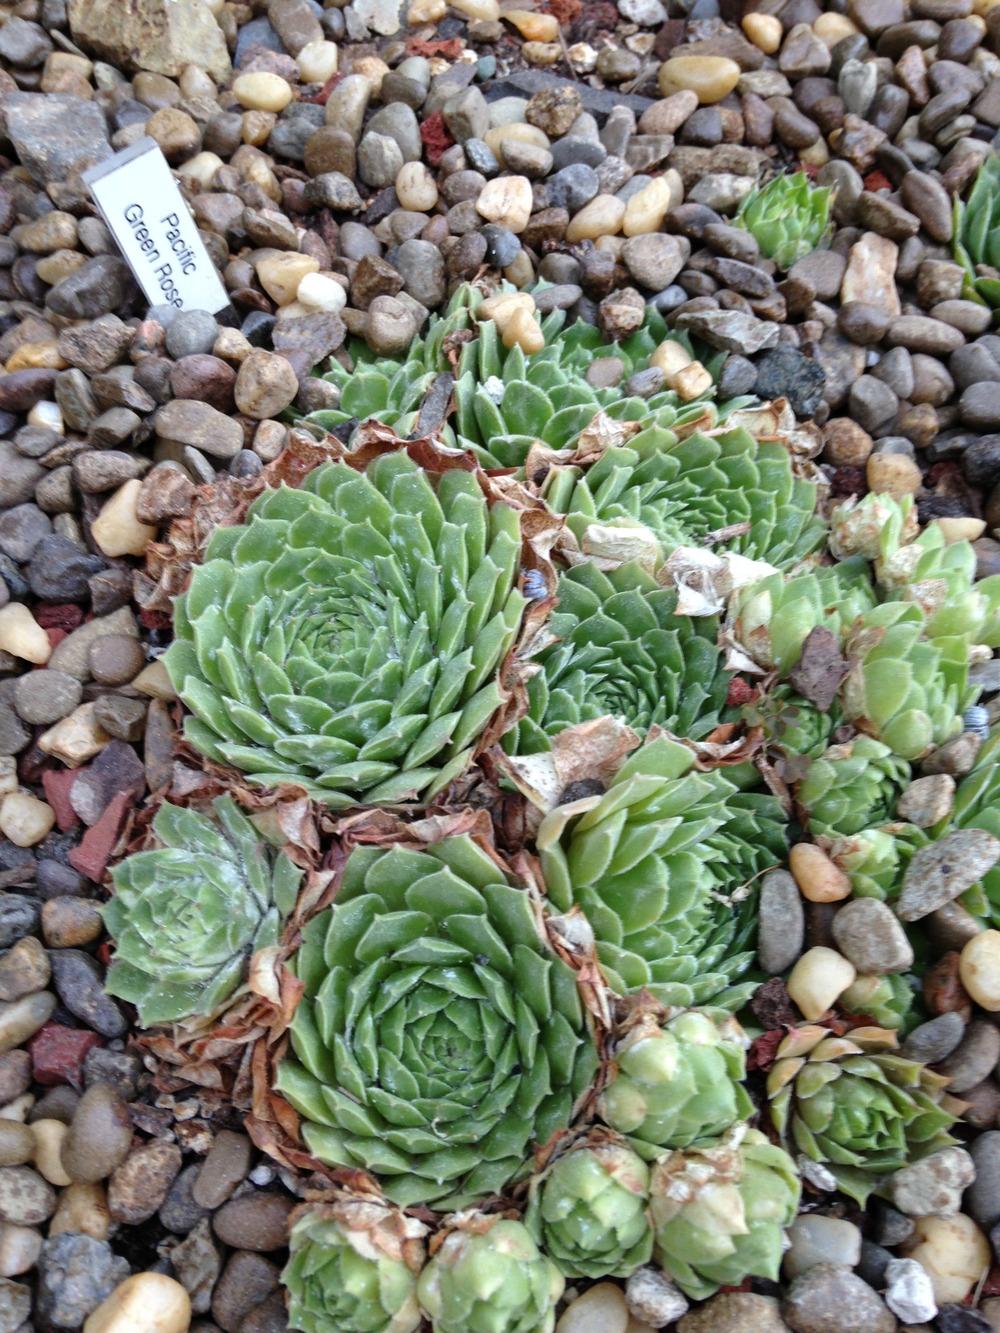 Photo of Hen and Chicks (Sempervivum 'Pacific Green Rose') uploaded by webesemps